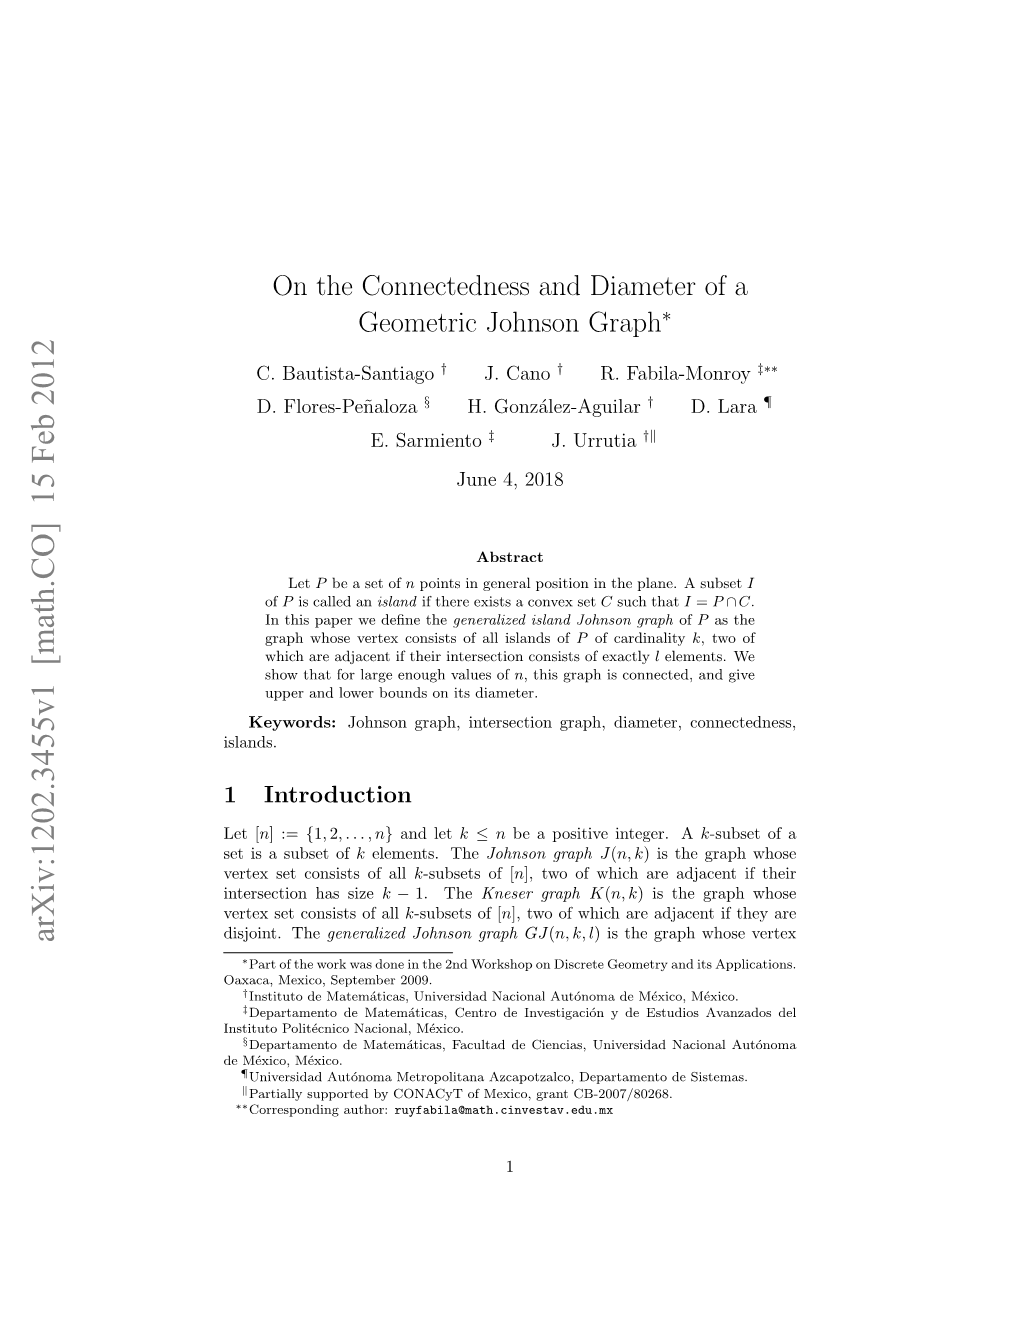 On the Connectedness and Diameter of a Geometric Johnson Graph∗